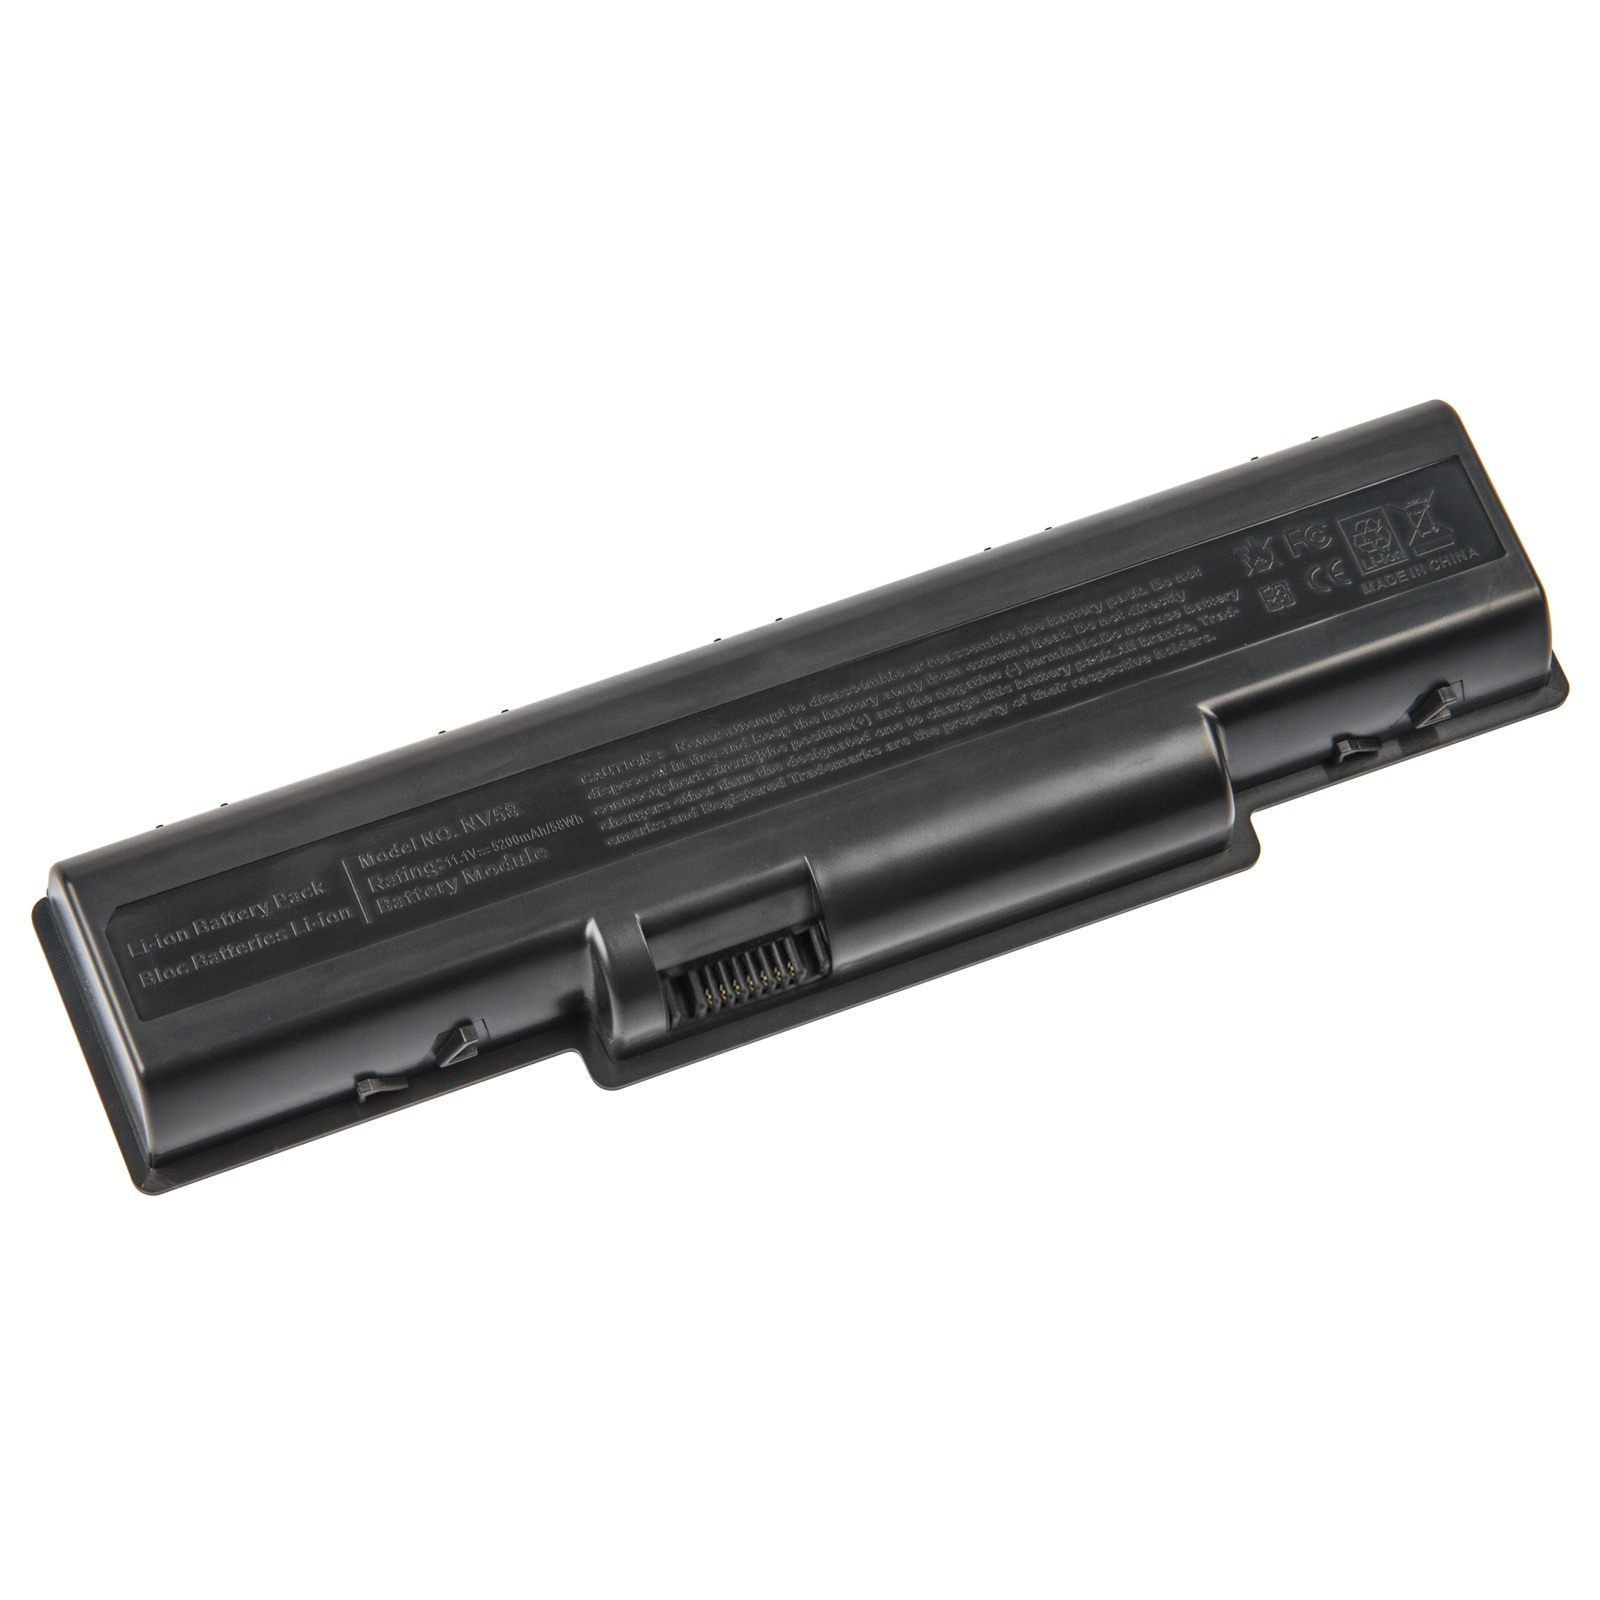 6 Cell Battery for Acer Aspire 5516 5517 5532 5334 5732z AS09A31 AS09A41 AS09A61 - image 1 of 4